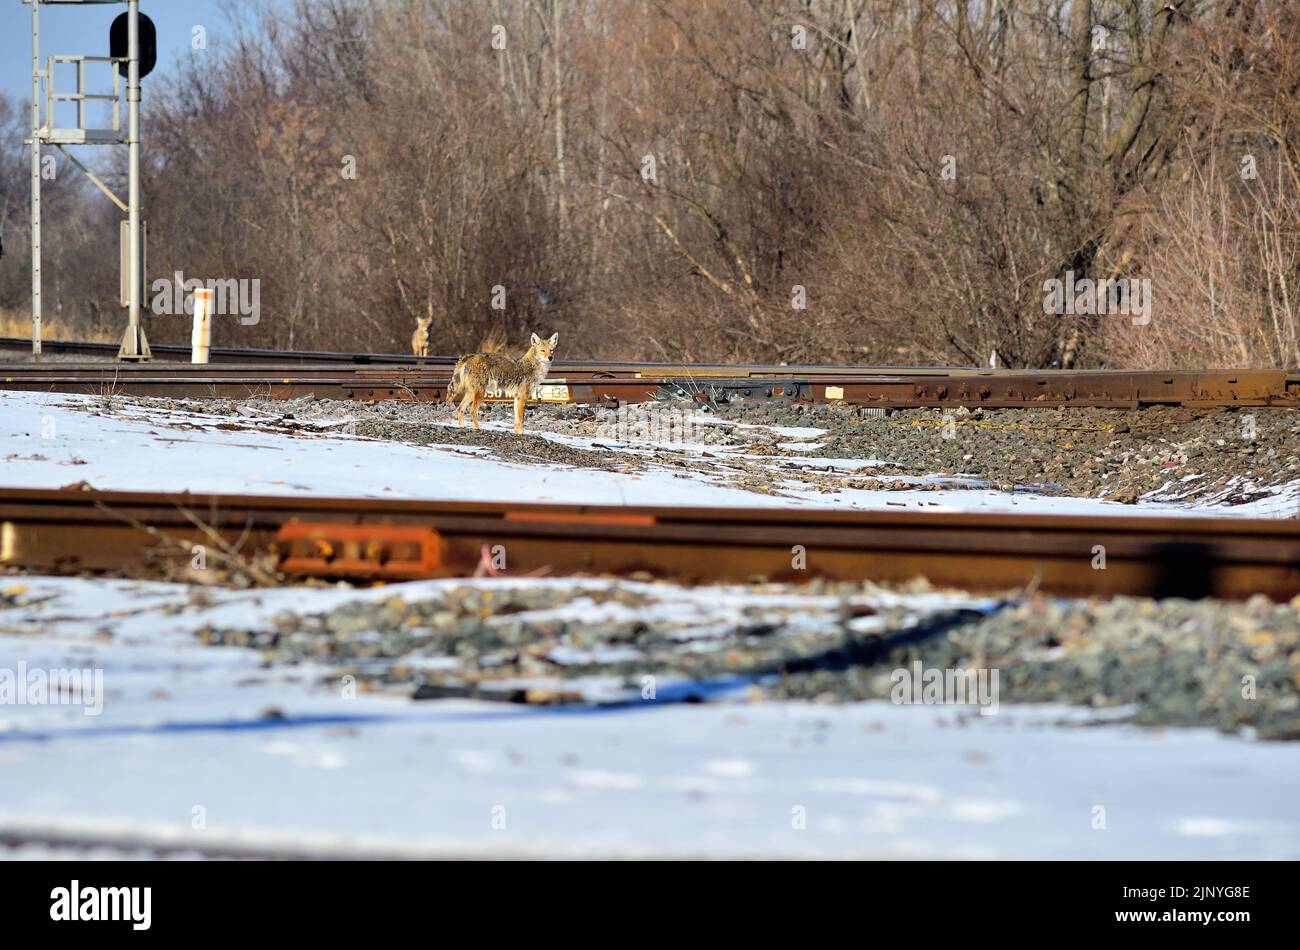 Bartlett, Illinois, USA. Wolves (Canis lupus) appear to be looking to see if a train is coming as they move to cross a series of railroad tracks. Stock Photo